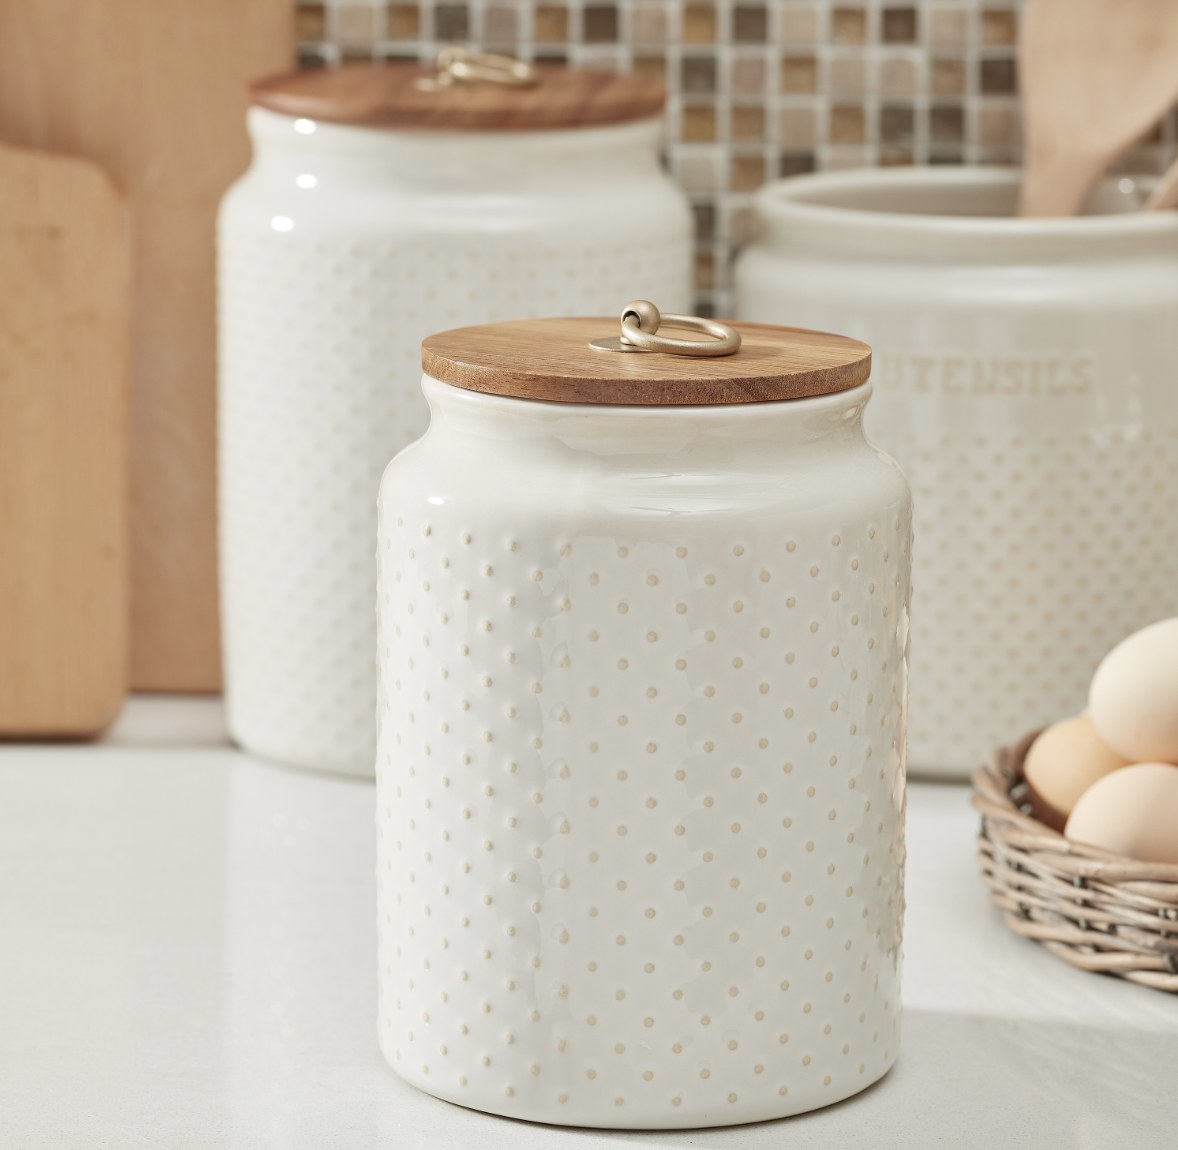 the white canister which has raised polka-dot detailing